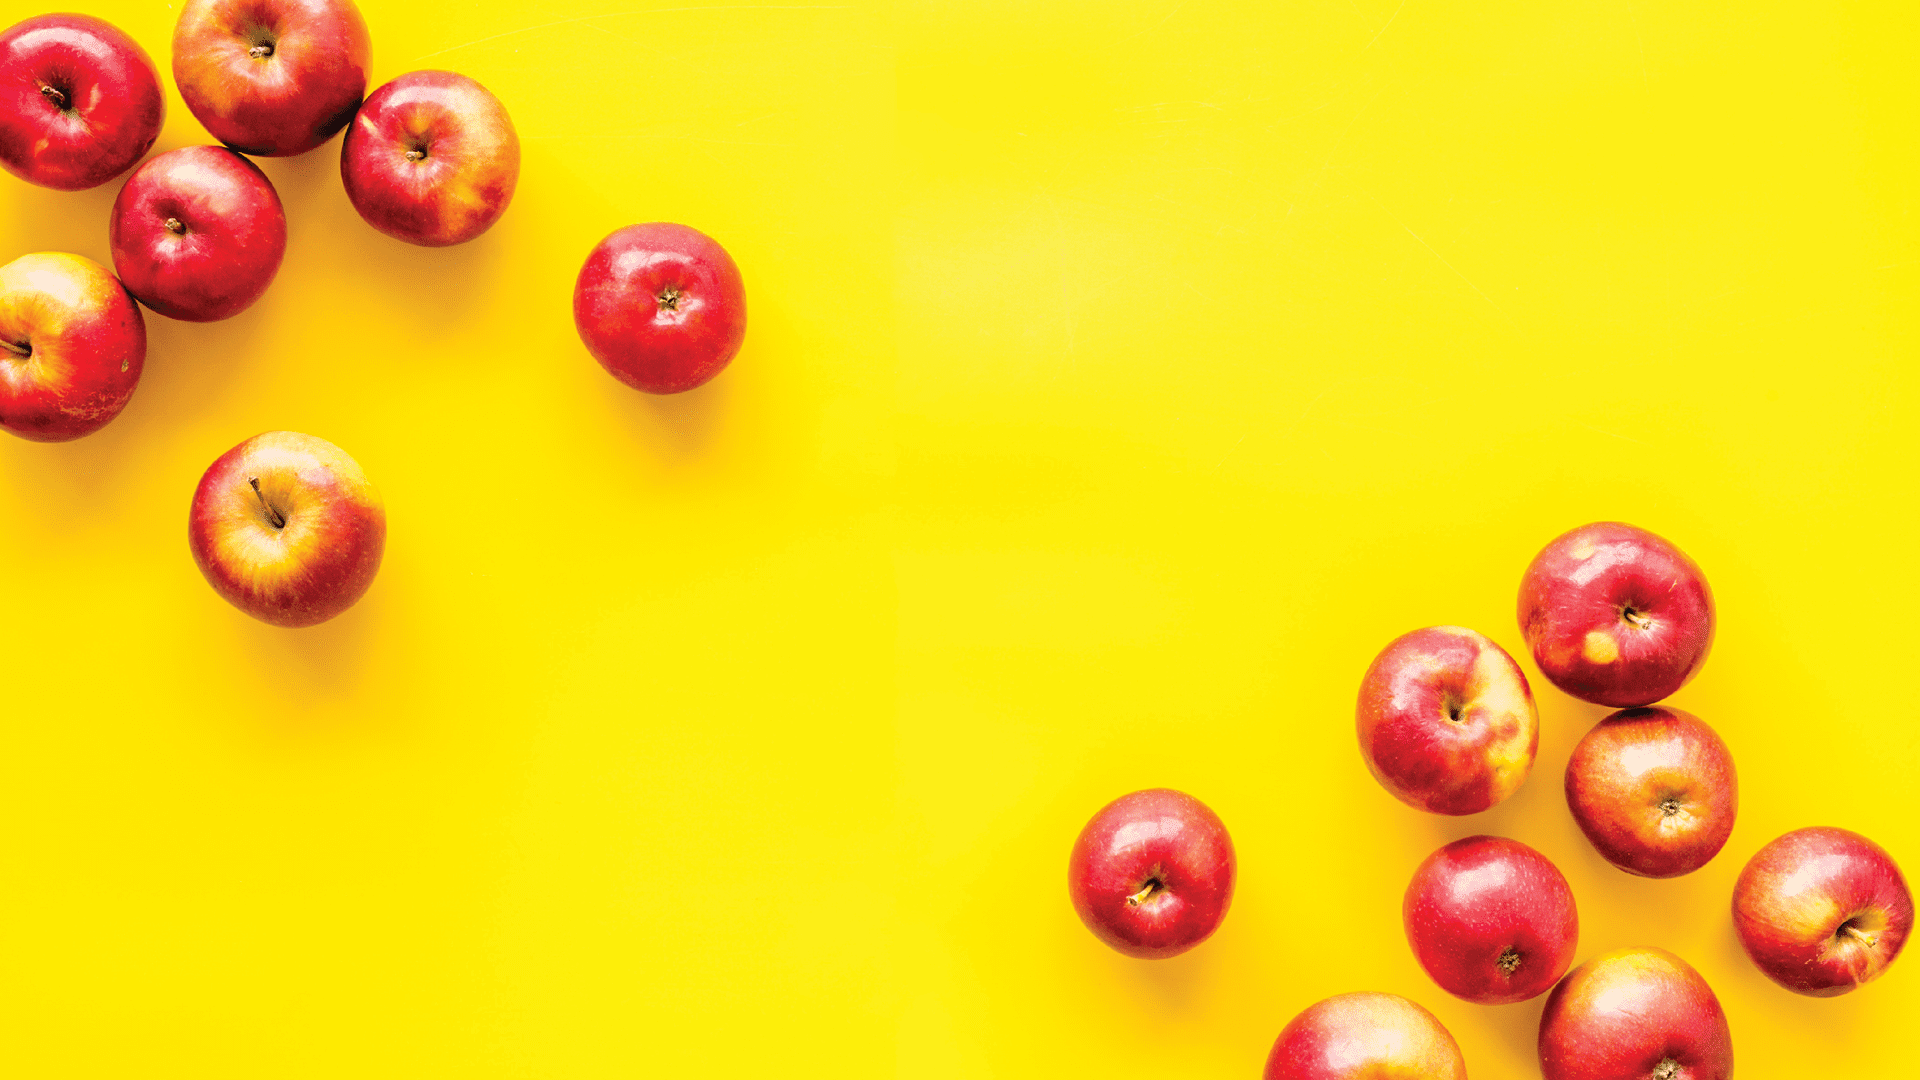 Apples scattered on a yellow background.